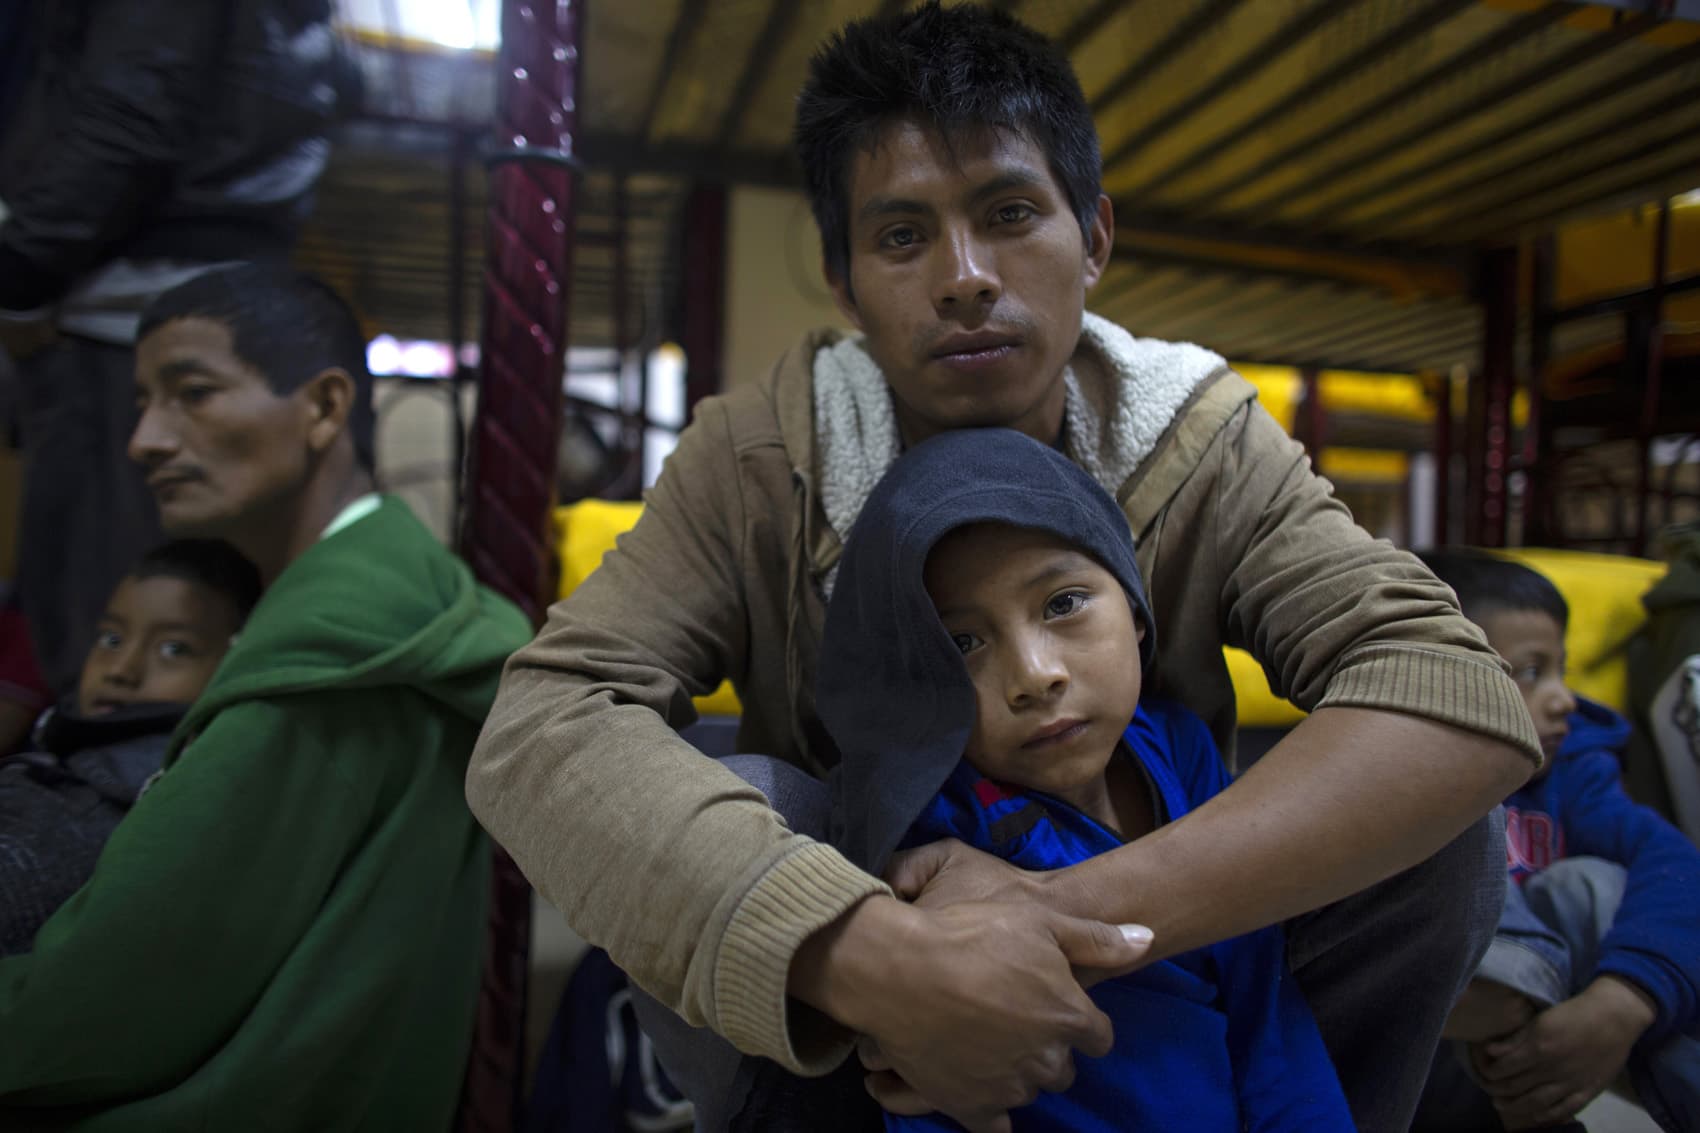 Abraham, 7, sits on the floor with his father, Miguel Martin, 27, at the San Juan Bosco migrant shelter, in Nogales, Mexico. Miguel left behind his wife and another son in hopes of getting enough work to buy some land in their hometown since they are now practically homeless in Guatemala. (Dario Lopez-Mills/AP)